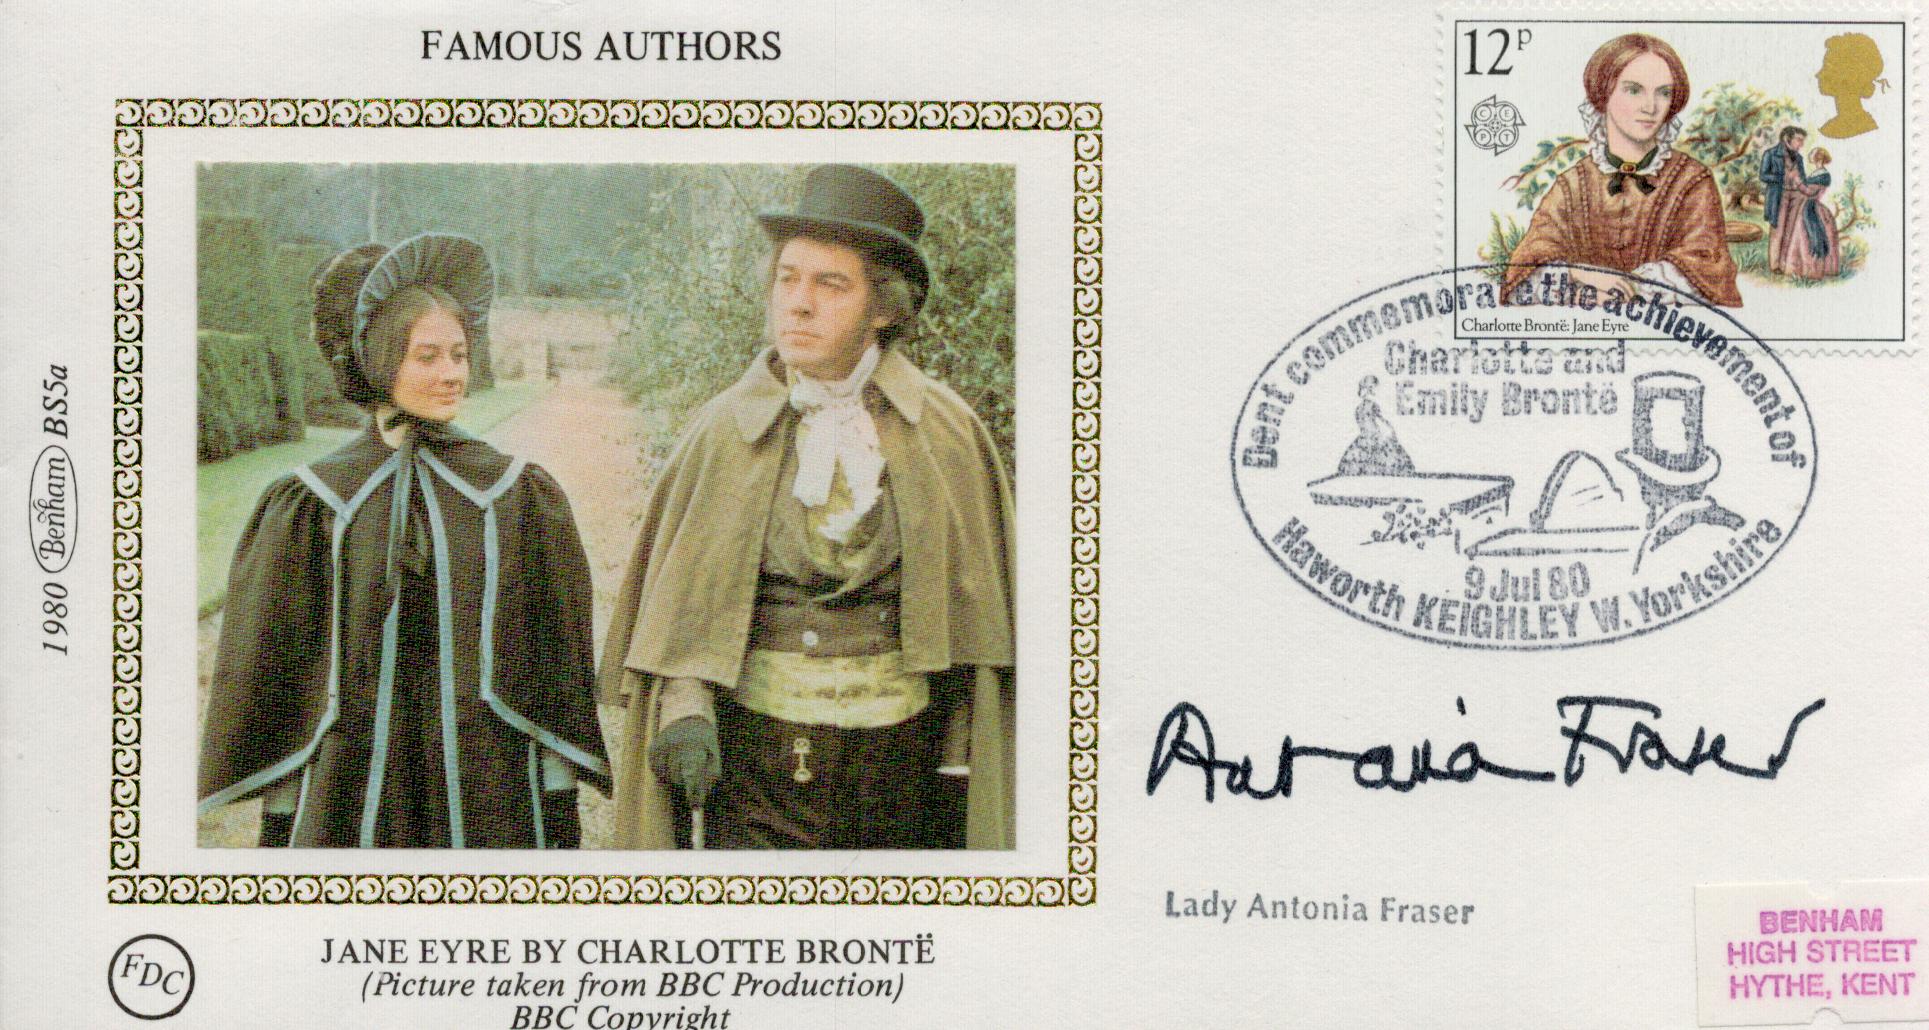 Lady Antonia Fraser signed FDC. Famous Authors Jane Eyre by Charlotte bronte. Single postmarked